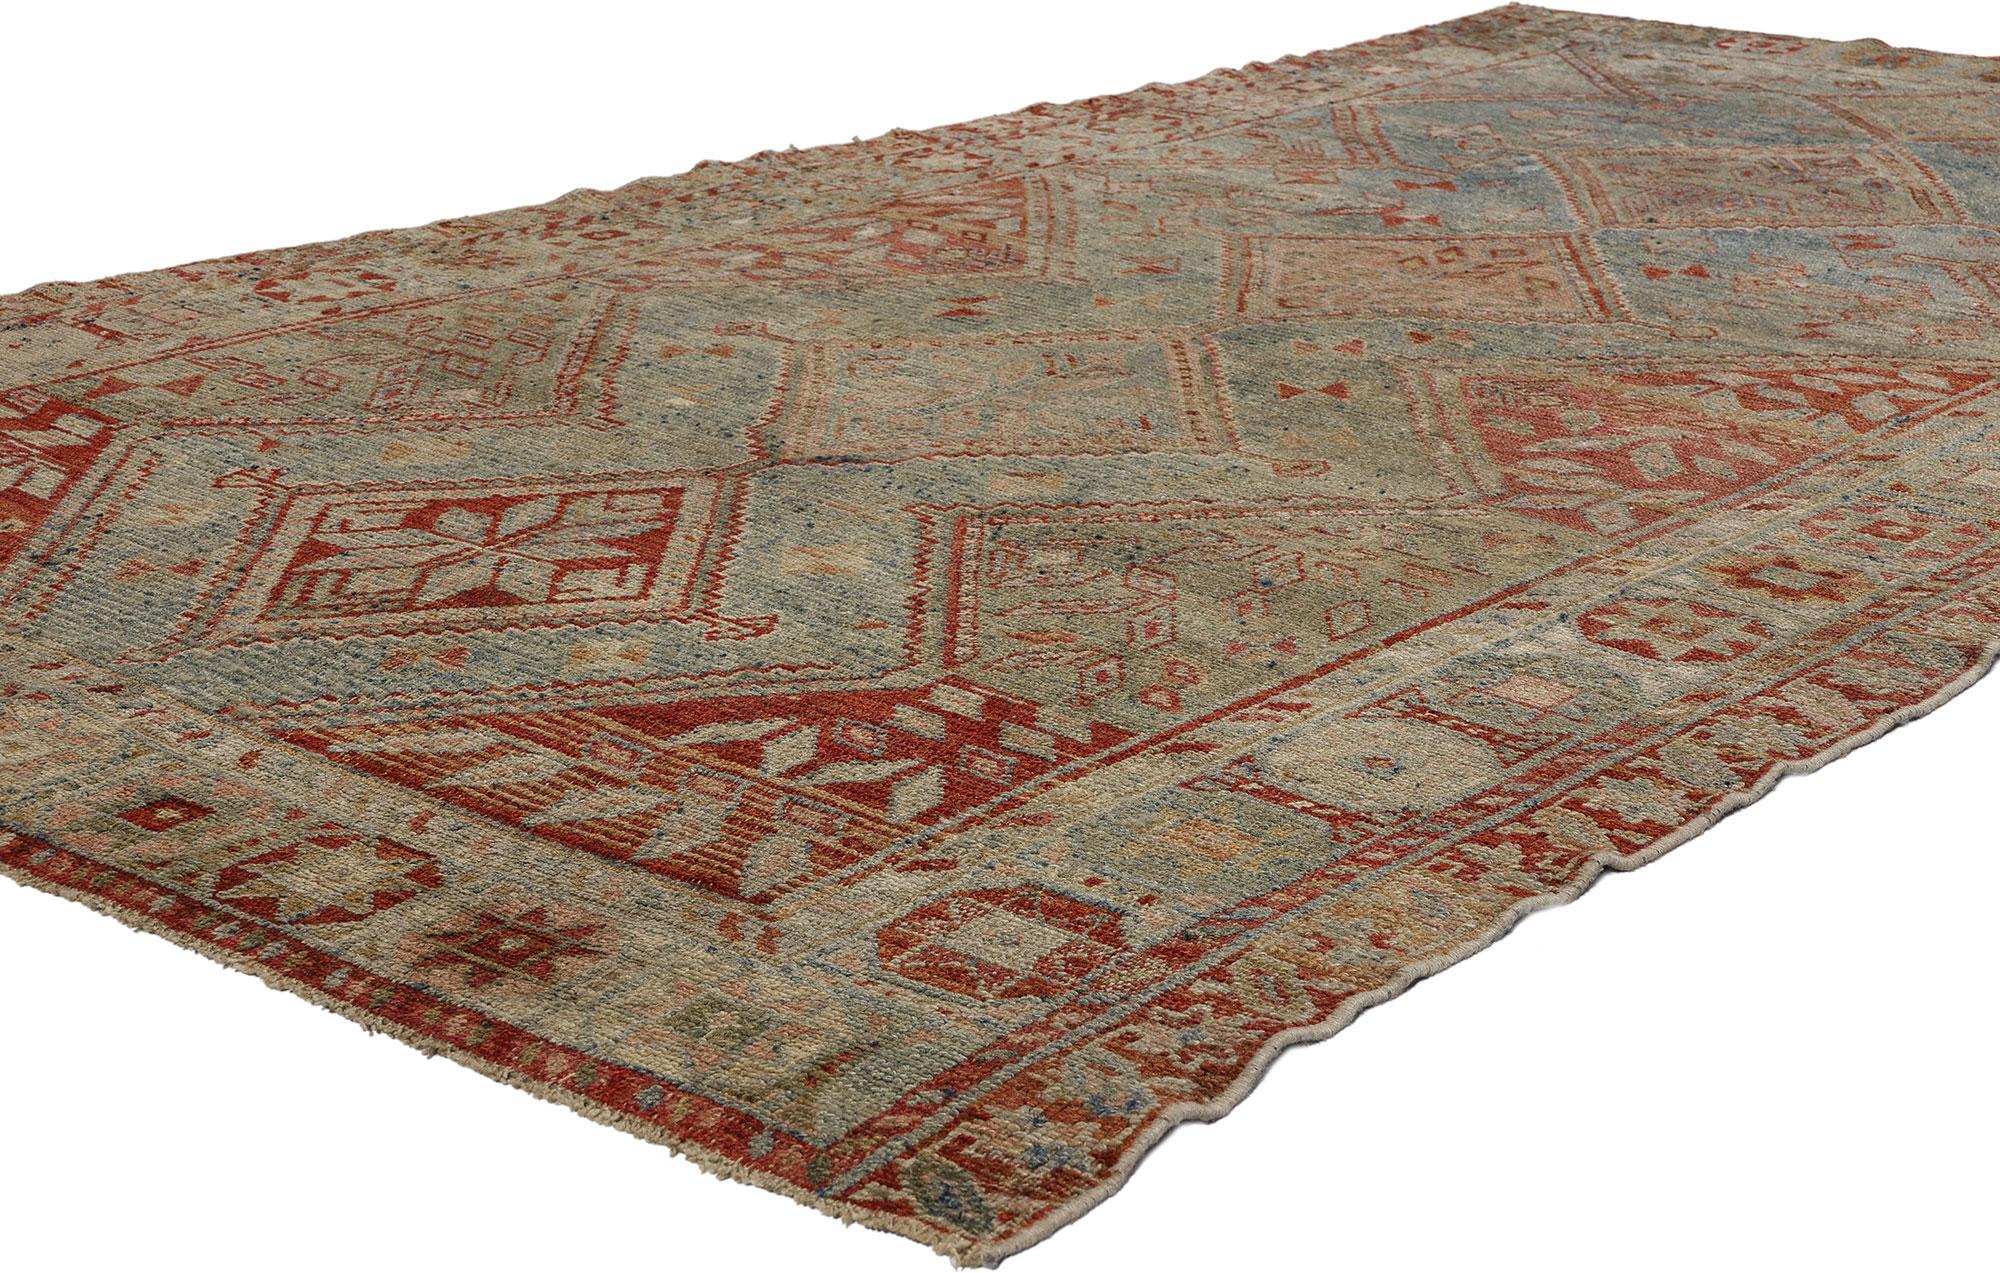 52455 Antique Persian Shiraz Rug, 04’06 x 08’05. In the captivating realm of nomadic charm, behold this hand-knotted wool antique Persian Shiraz rug, a woven masterpiece that whispers tales of a bygone era. A subtle tribal style weaves its magic,